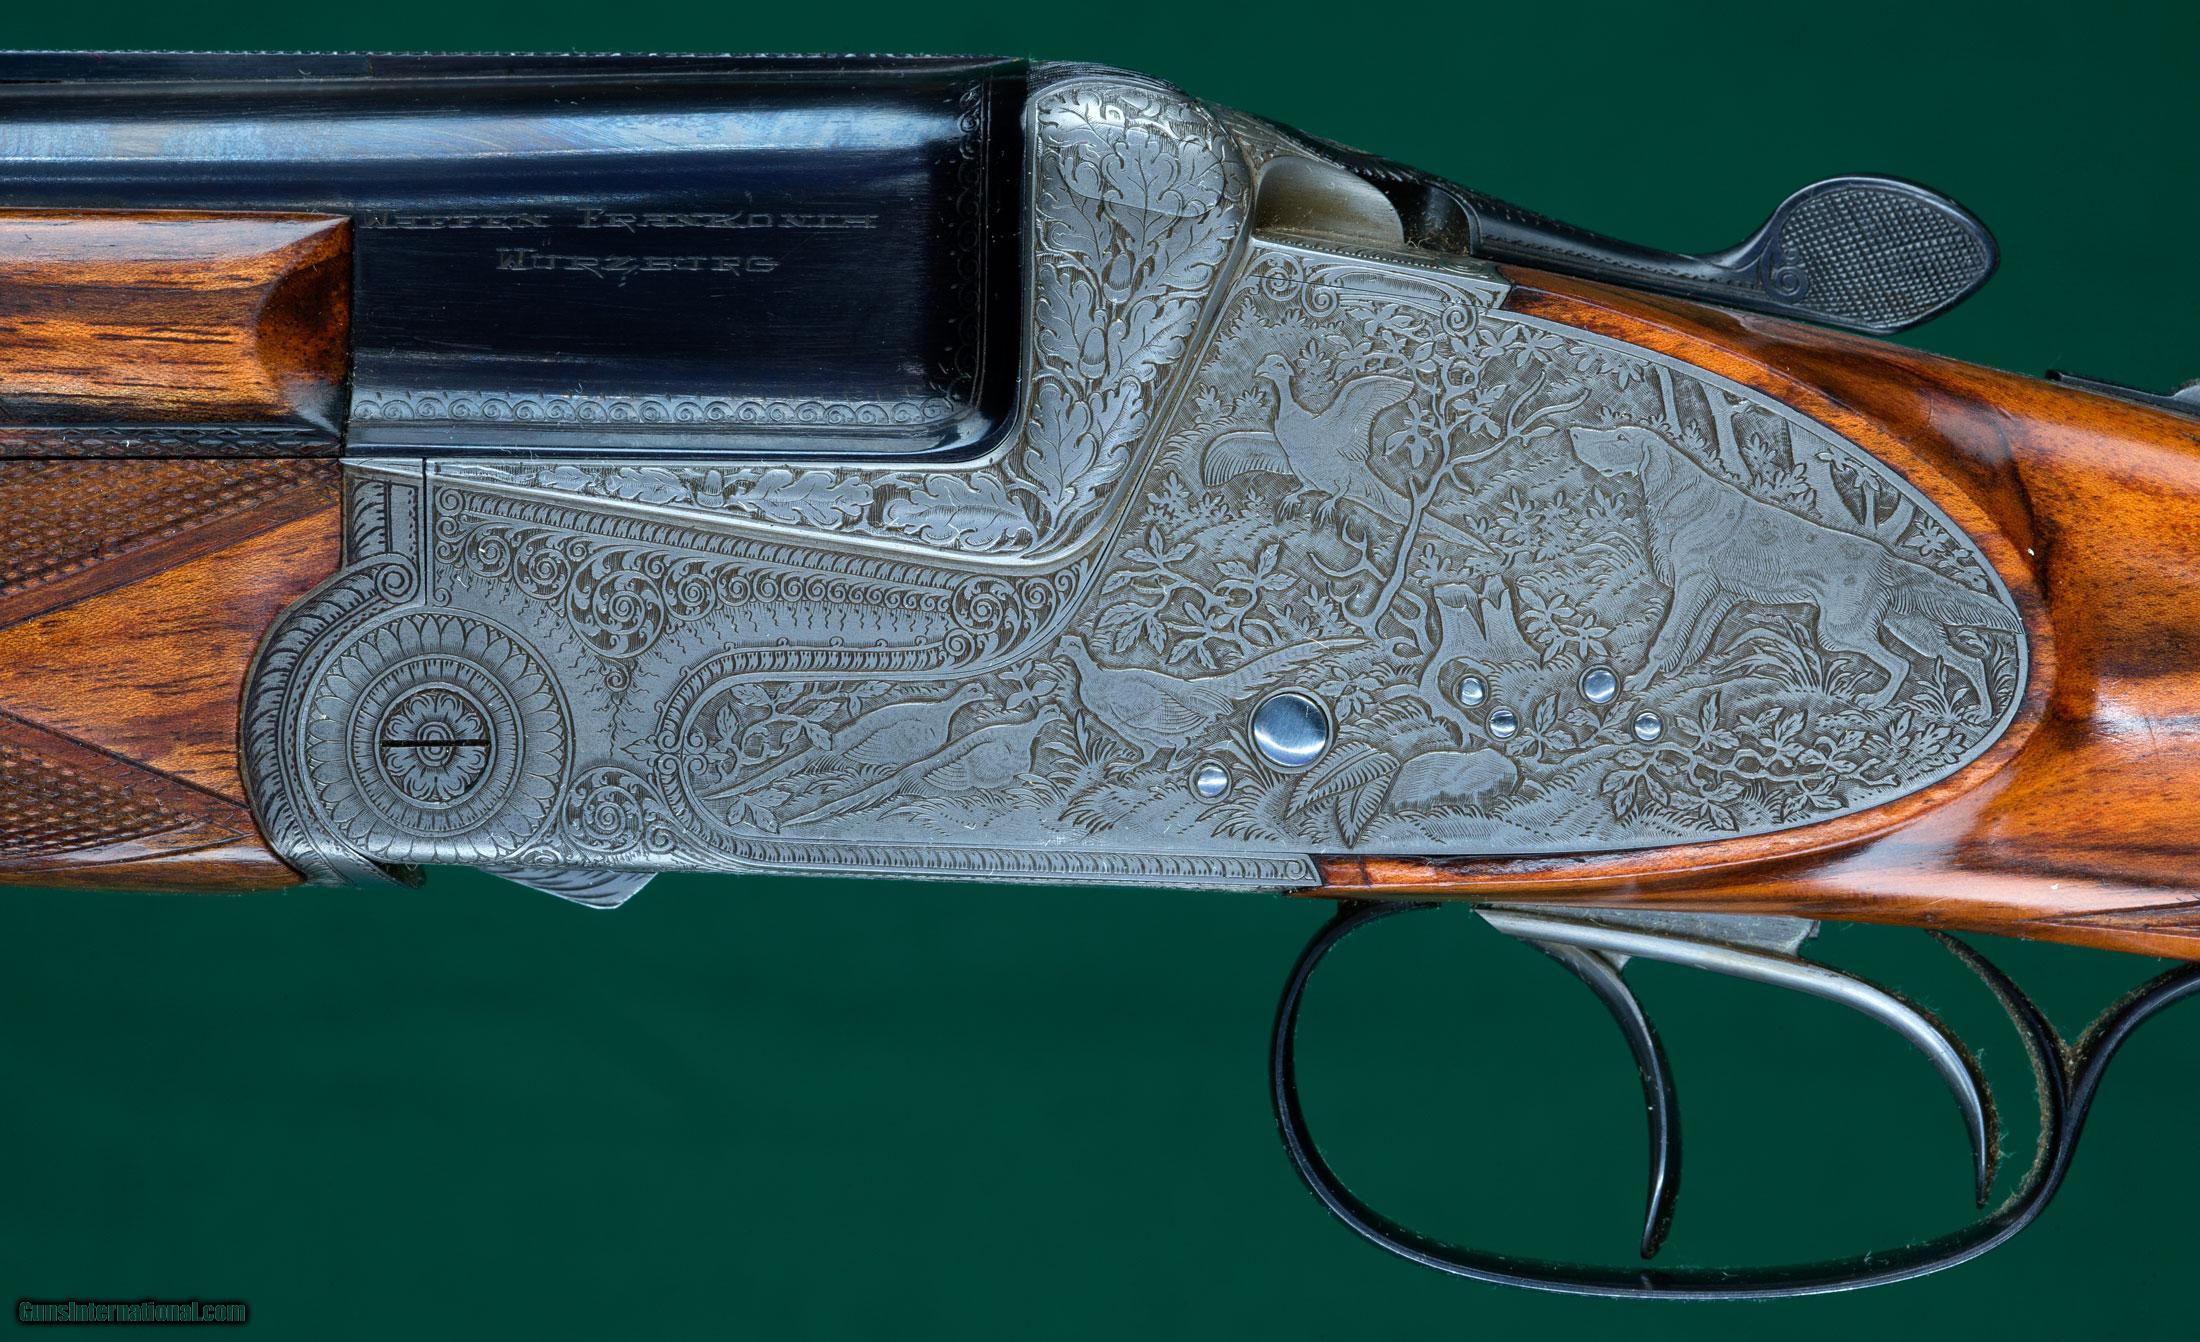 Sold at Auction: FAURE LE PAGE A PAIR OF 12-BORE SIDELOCK EJECTOR G